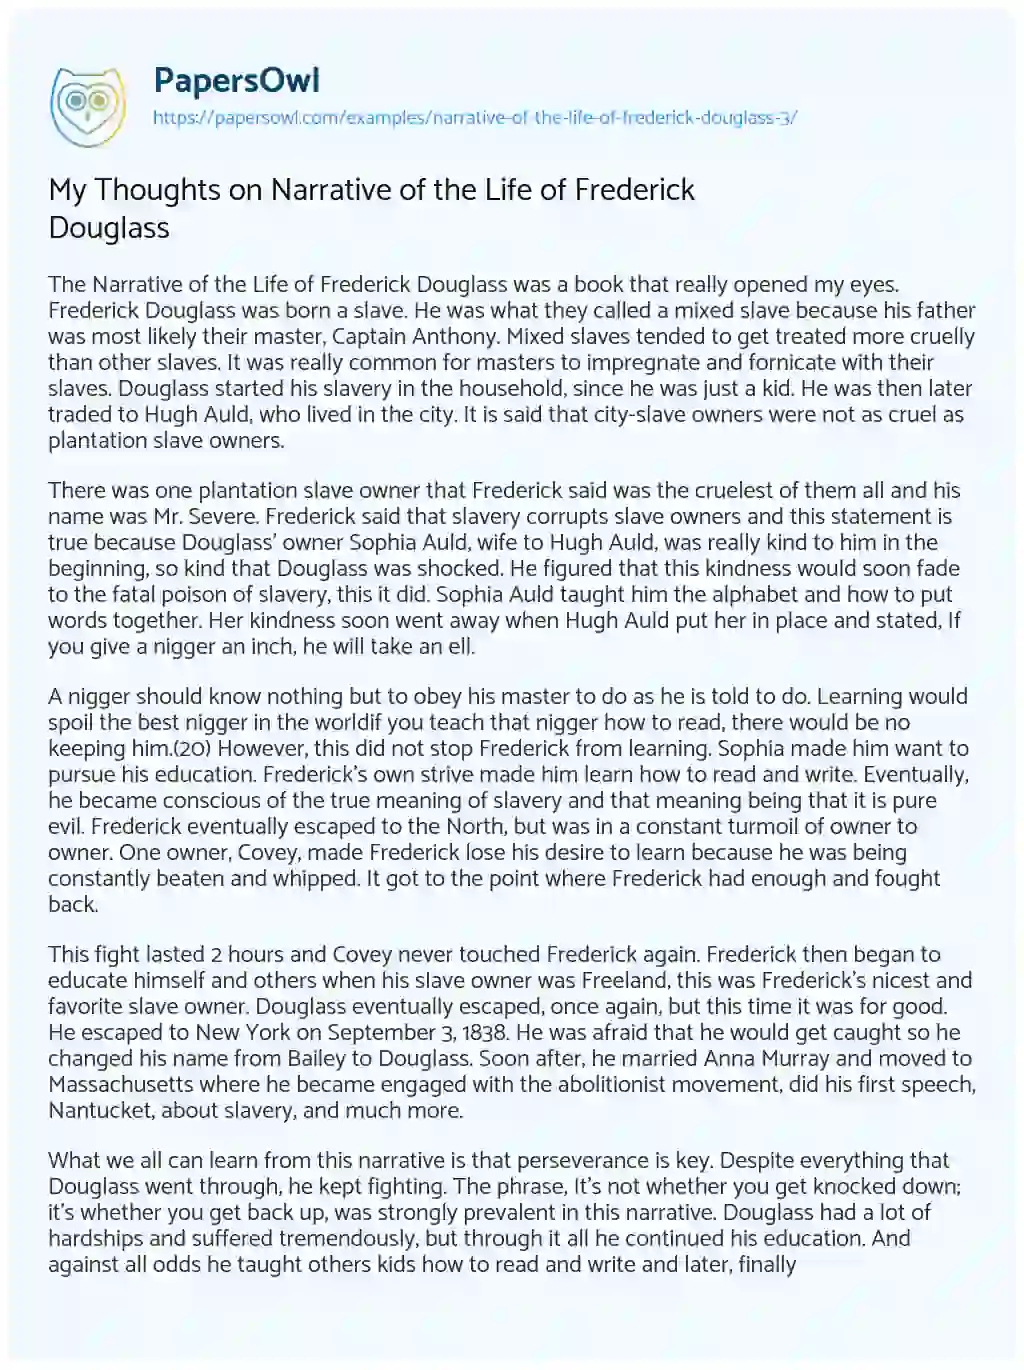 Essay on My Thoughts on Narrative of the Life of Frederick Douglass